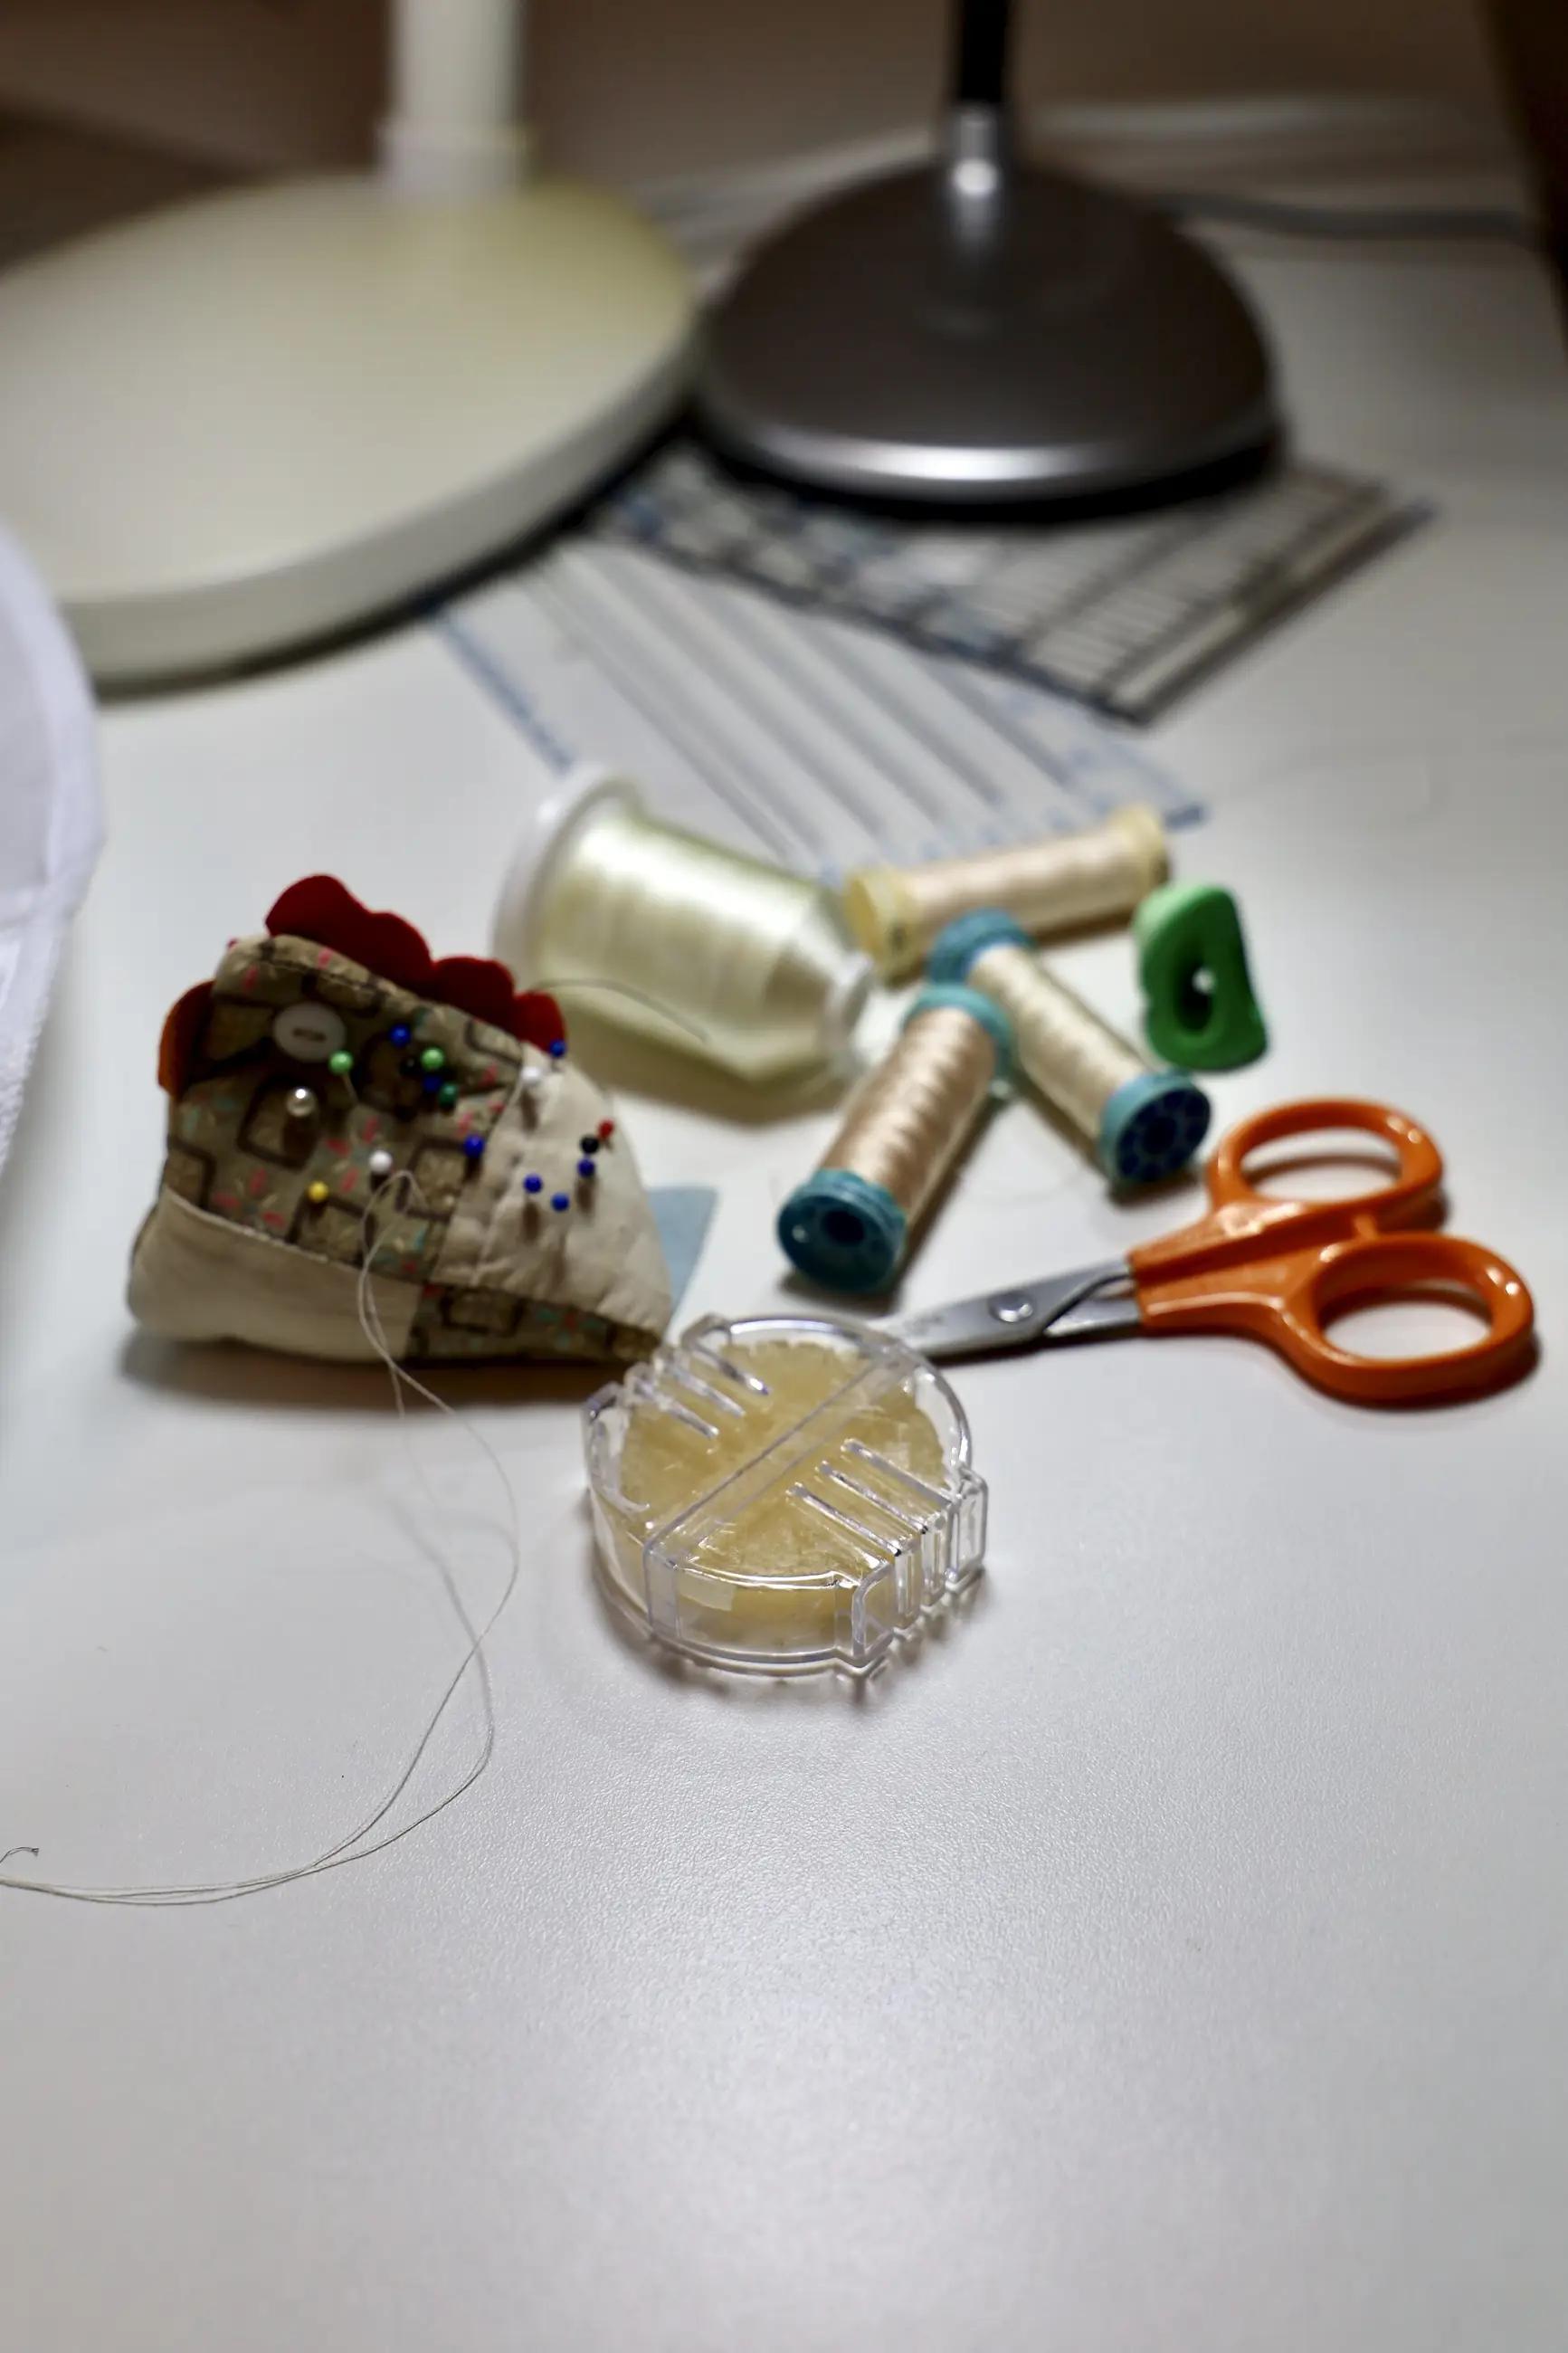 Tools for hand sewing: thin needles, pin cushion, various shades of thread, thimble, small scissors, and thread wax.